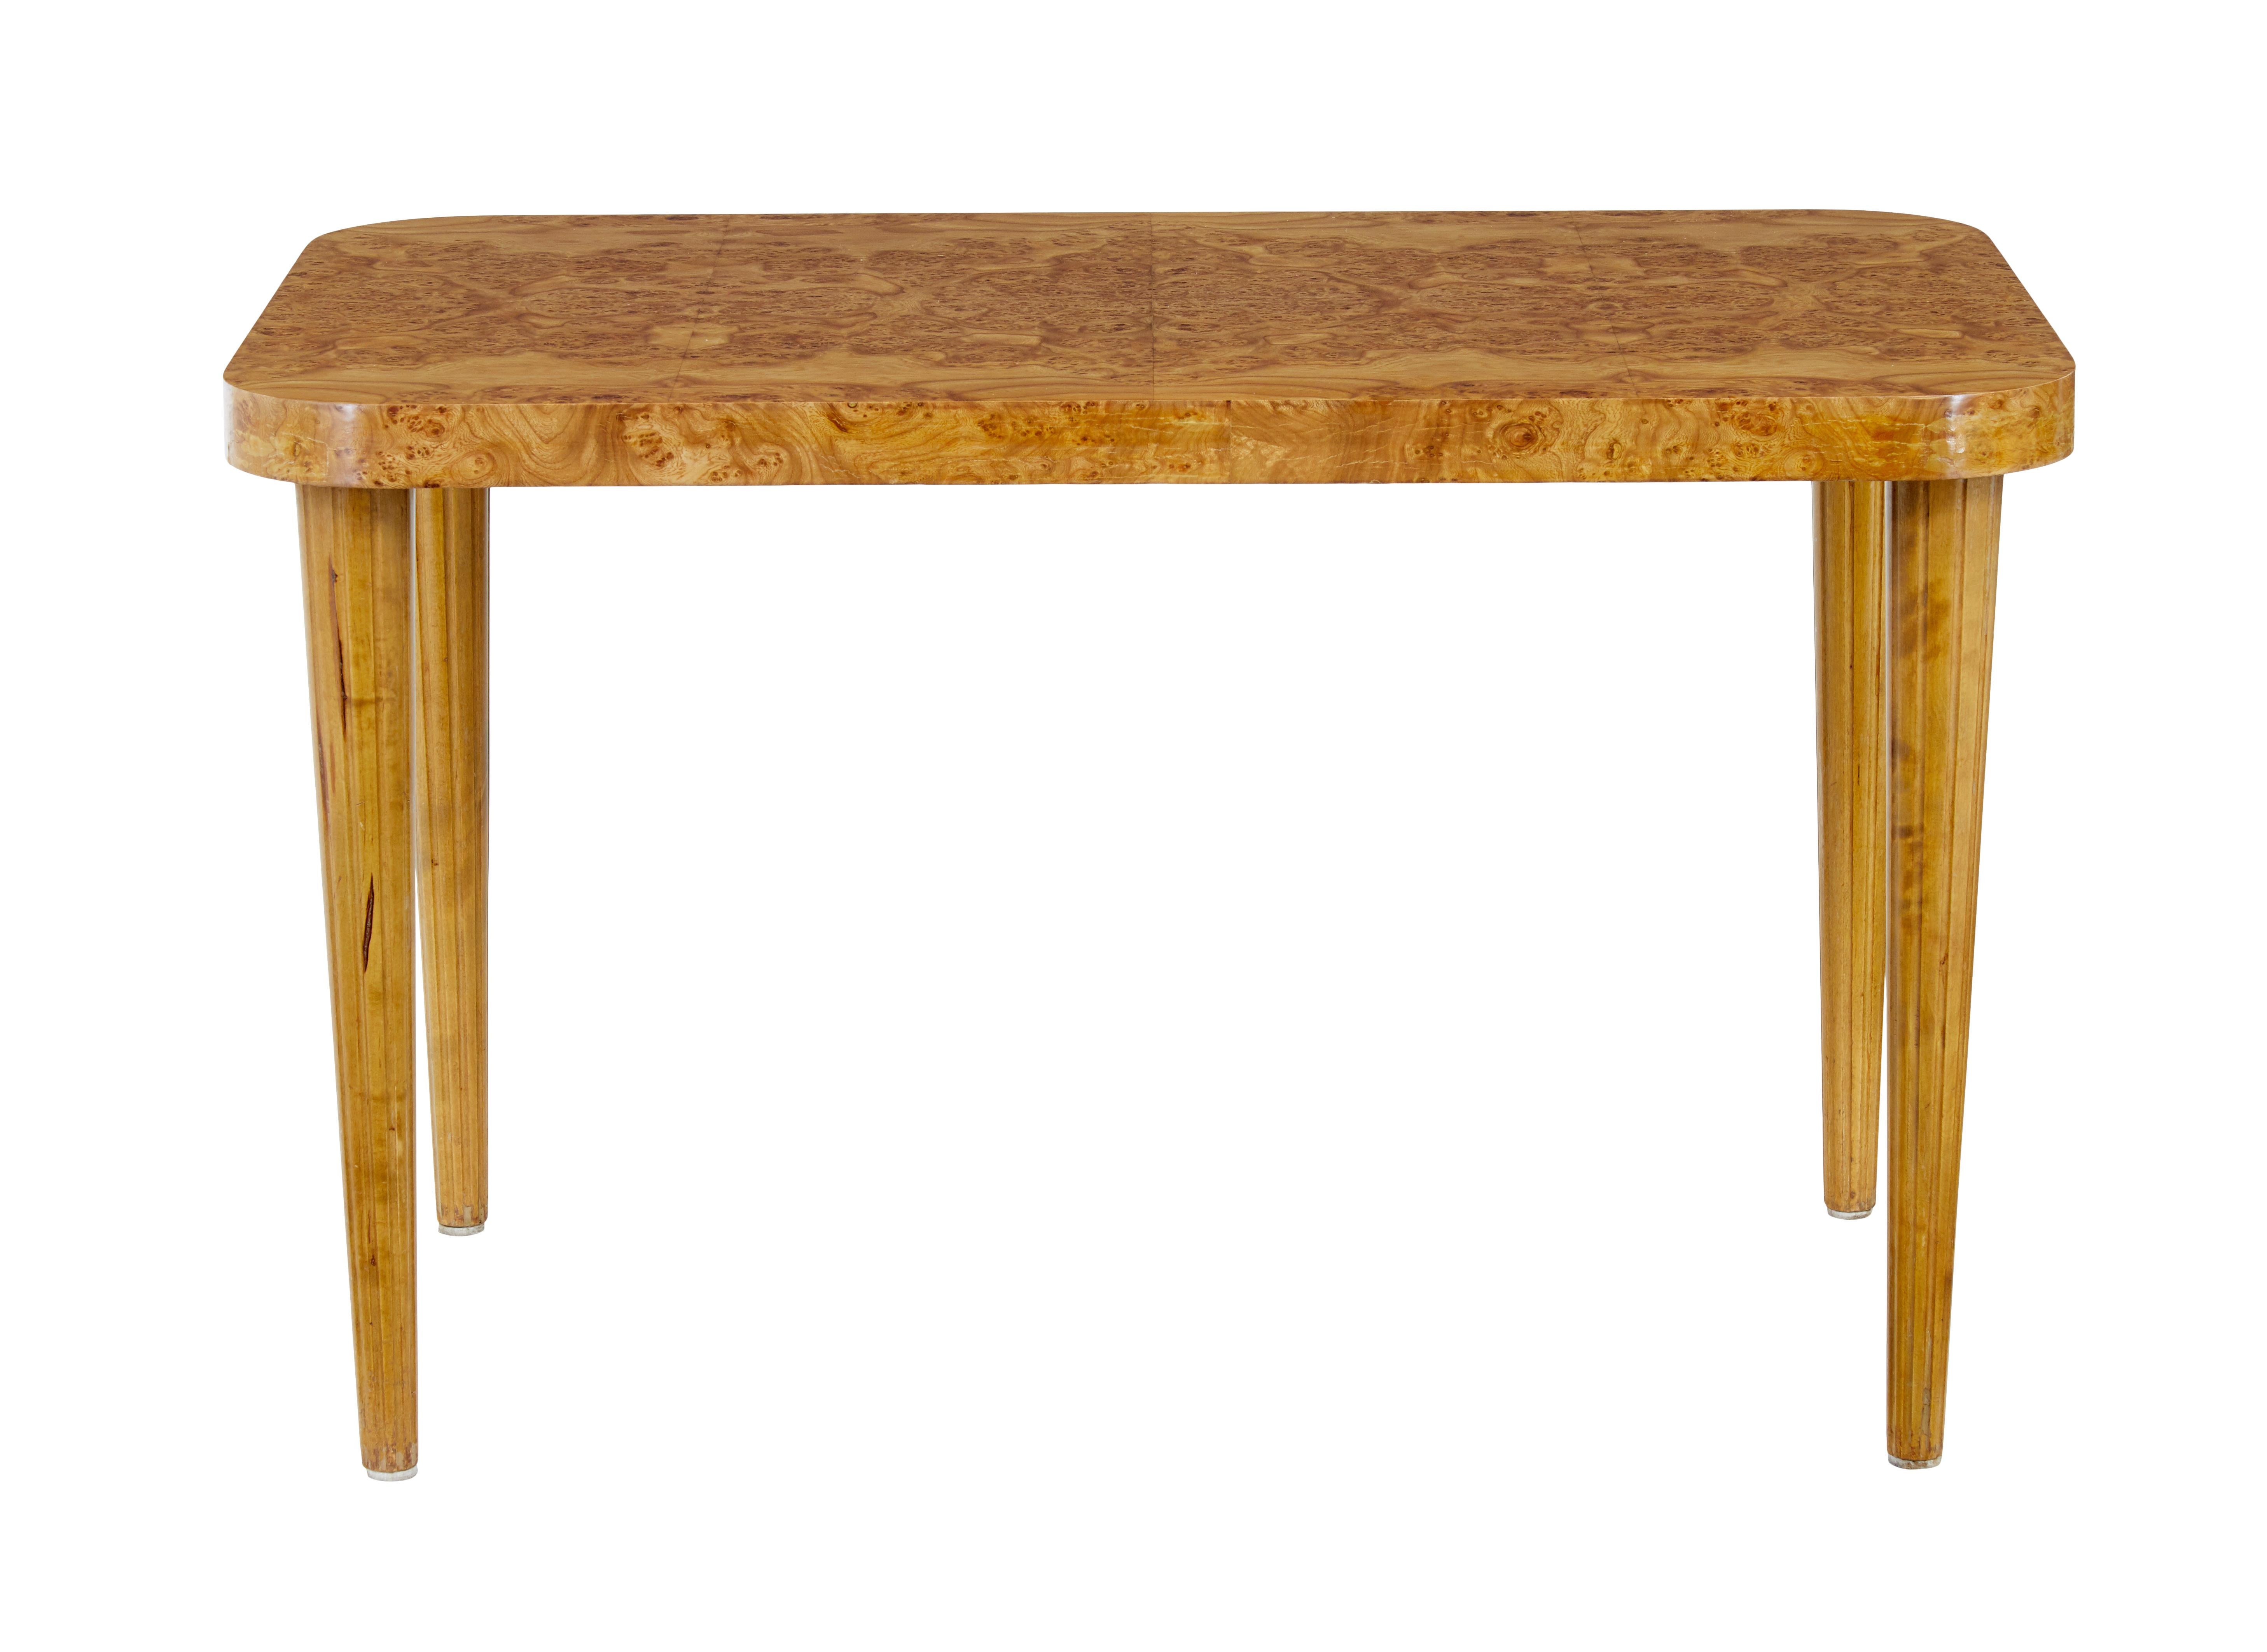 Mid 20th century Scandinavian elm root coffee table circa 1950.

Made using stunning matched elm root veneer.   Rectangular top with rounded edges with further veneer around the apron edge.

Supported by 4 birch tapering legs, with fluted detail. 